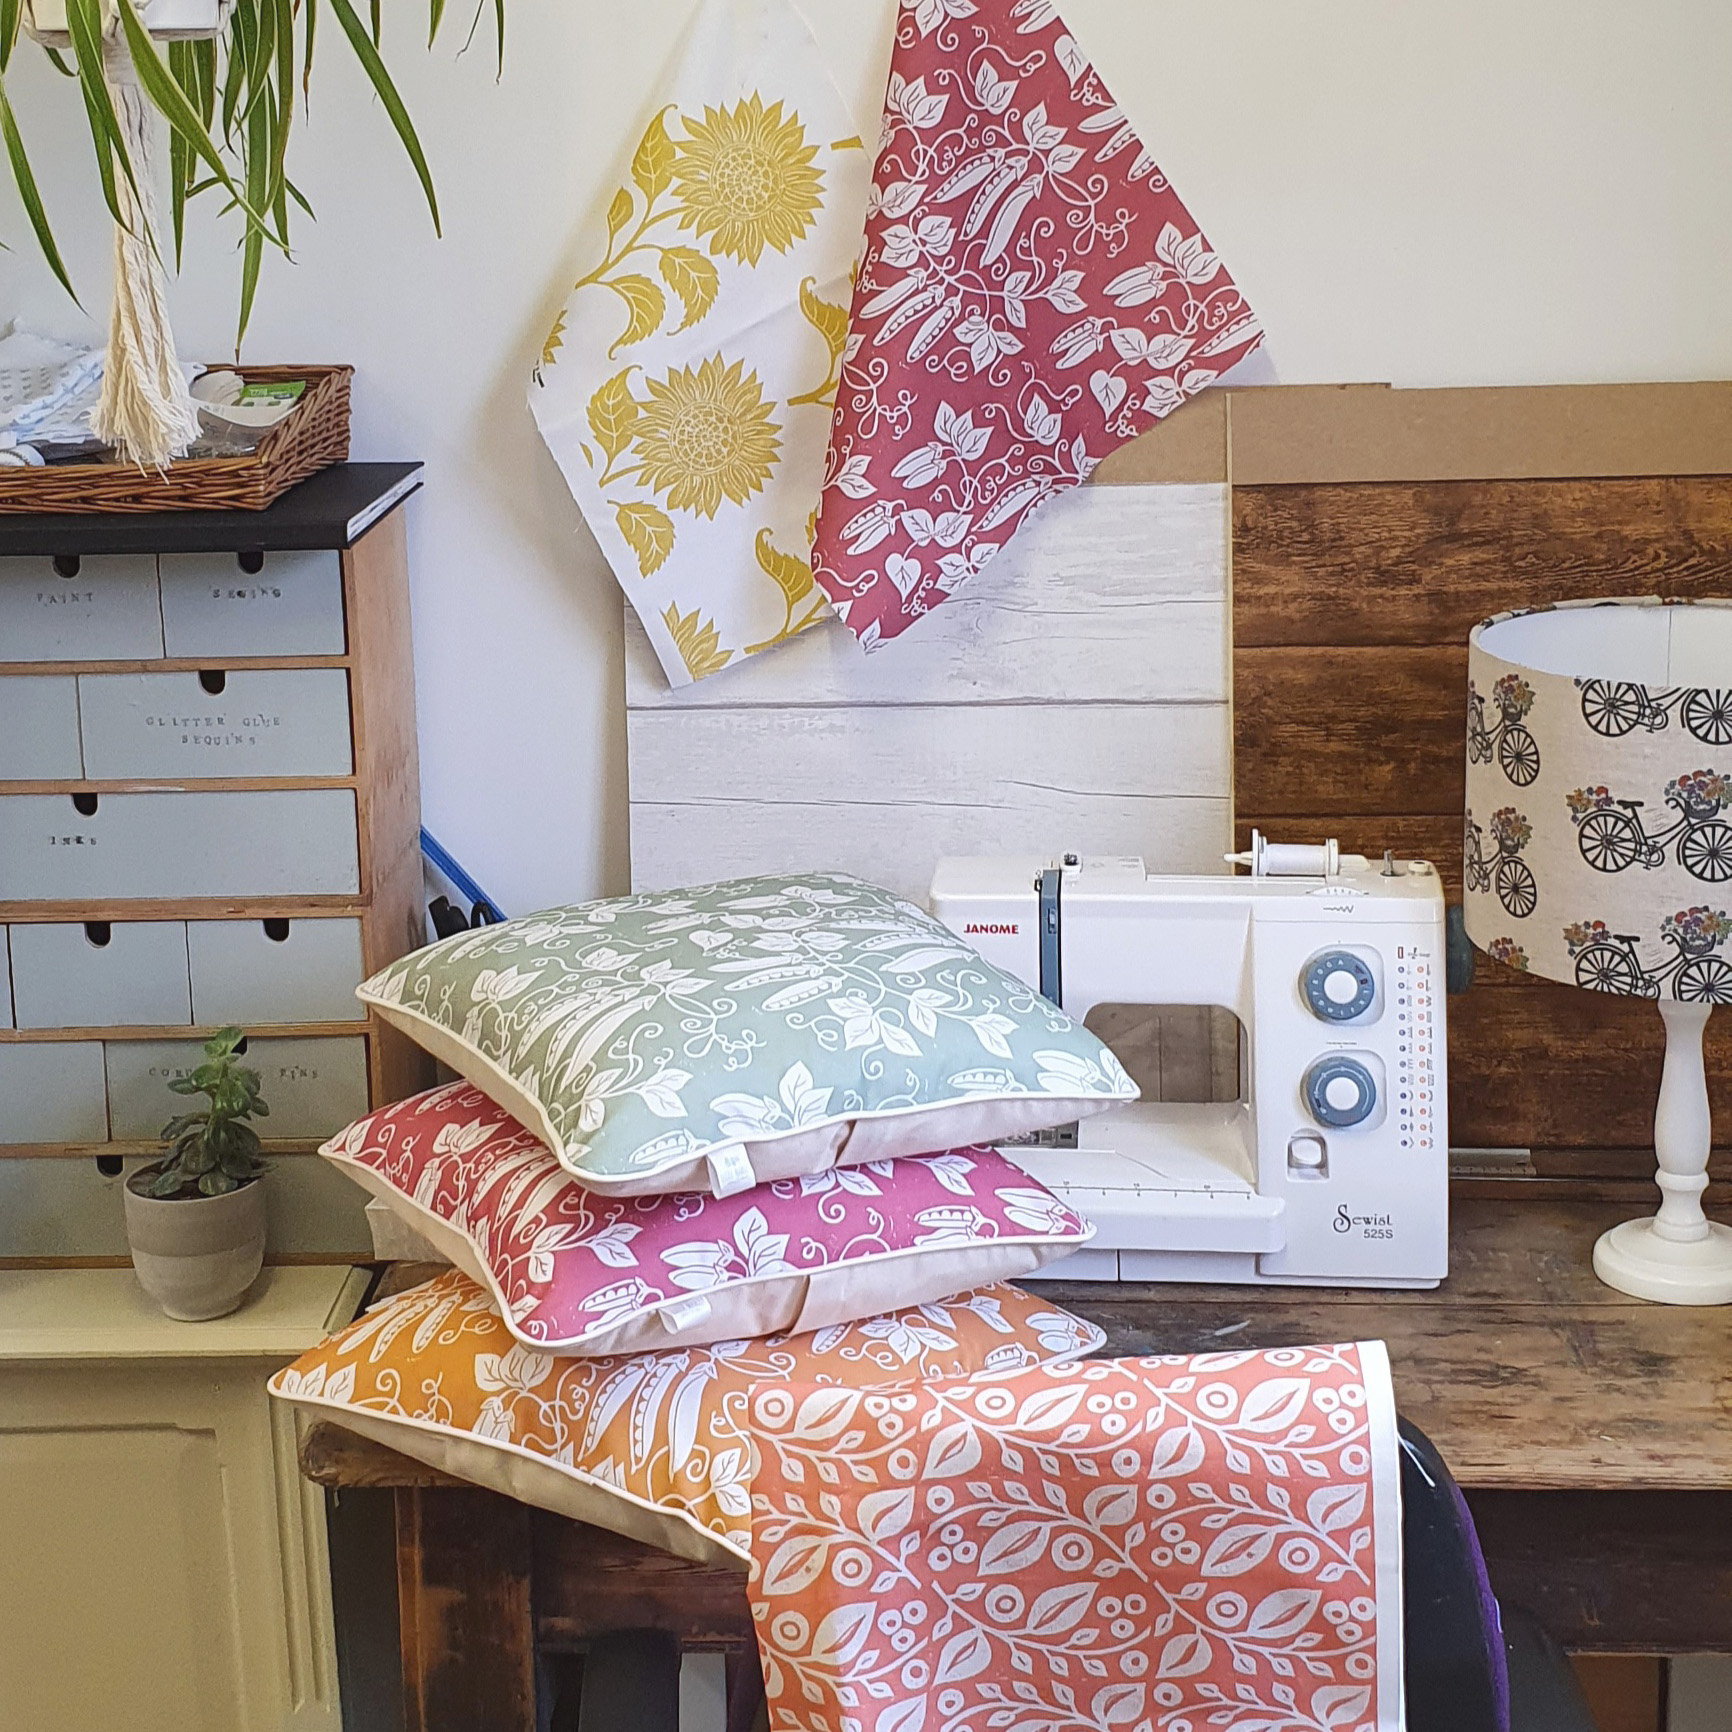 Sewing machine and fabric products by LIzzie Mabley